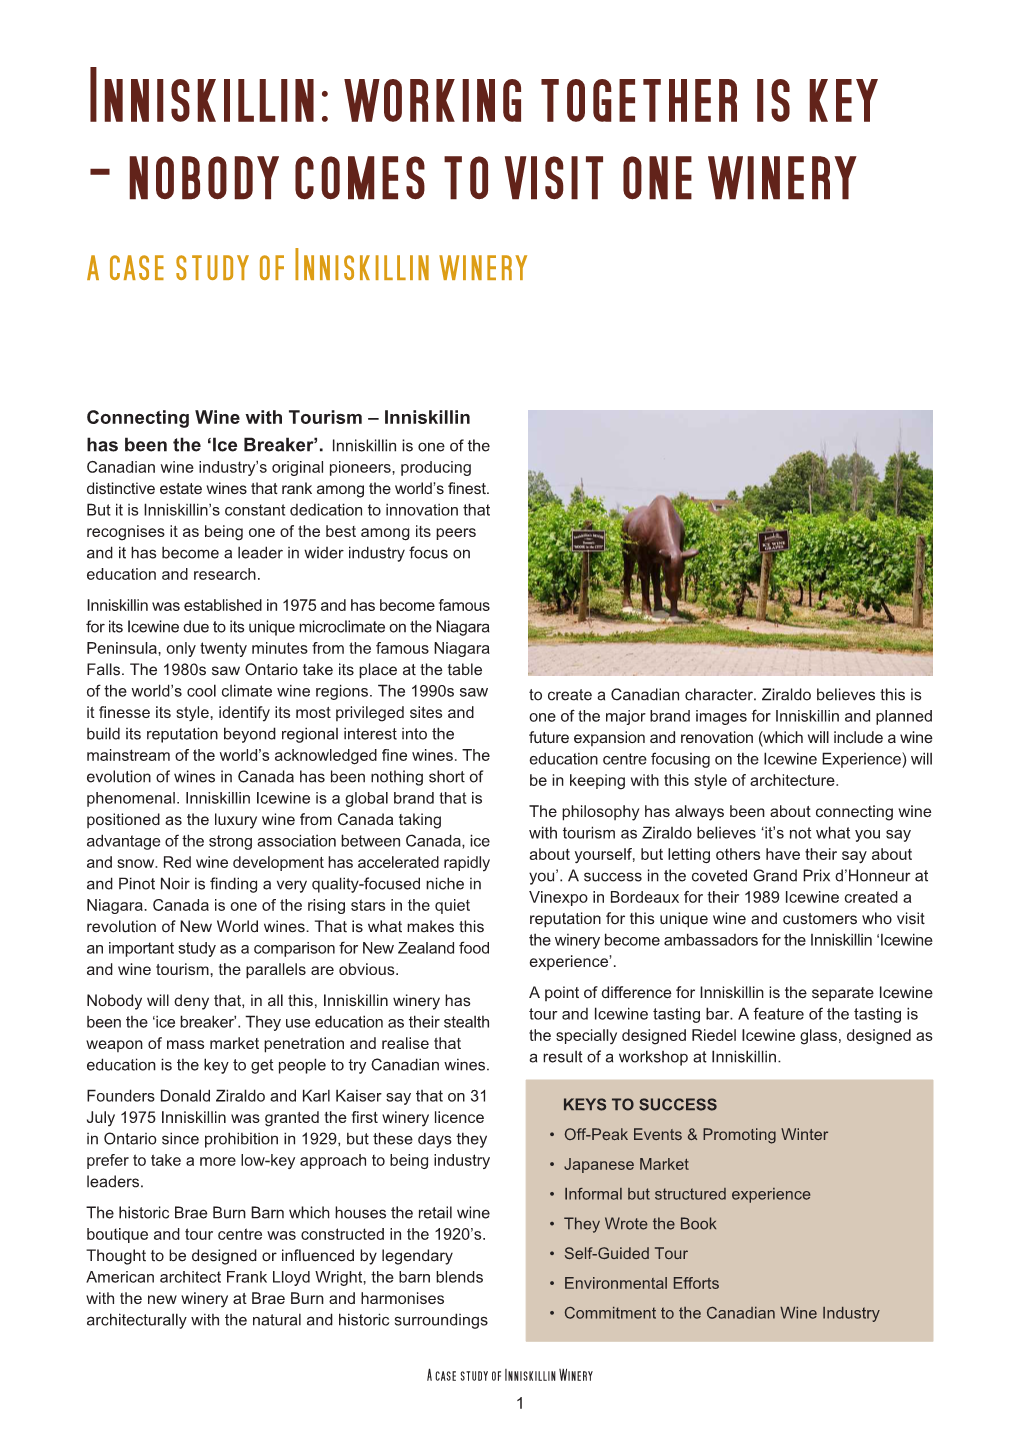 Connecting Wine with Tourism – Inniskillin Has Been the 'Ice Breaker